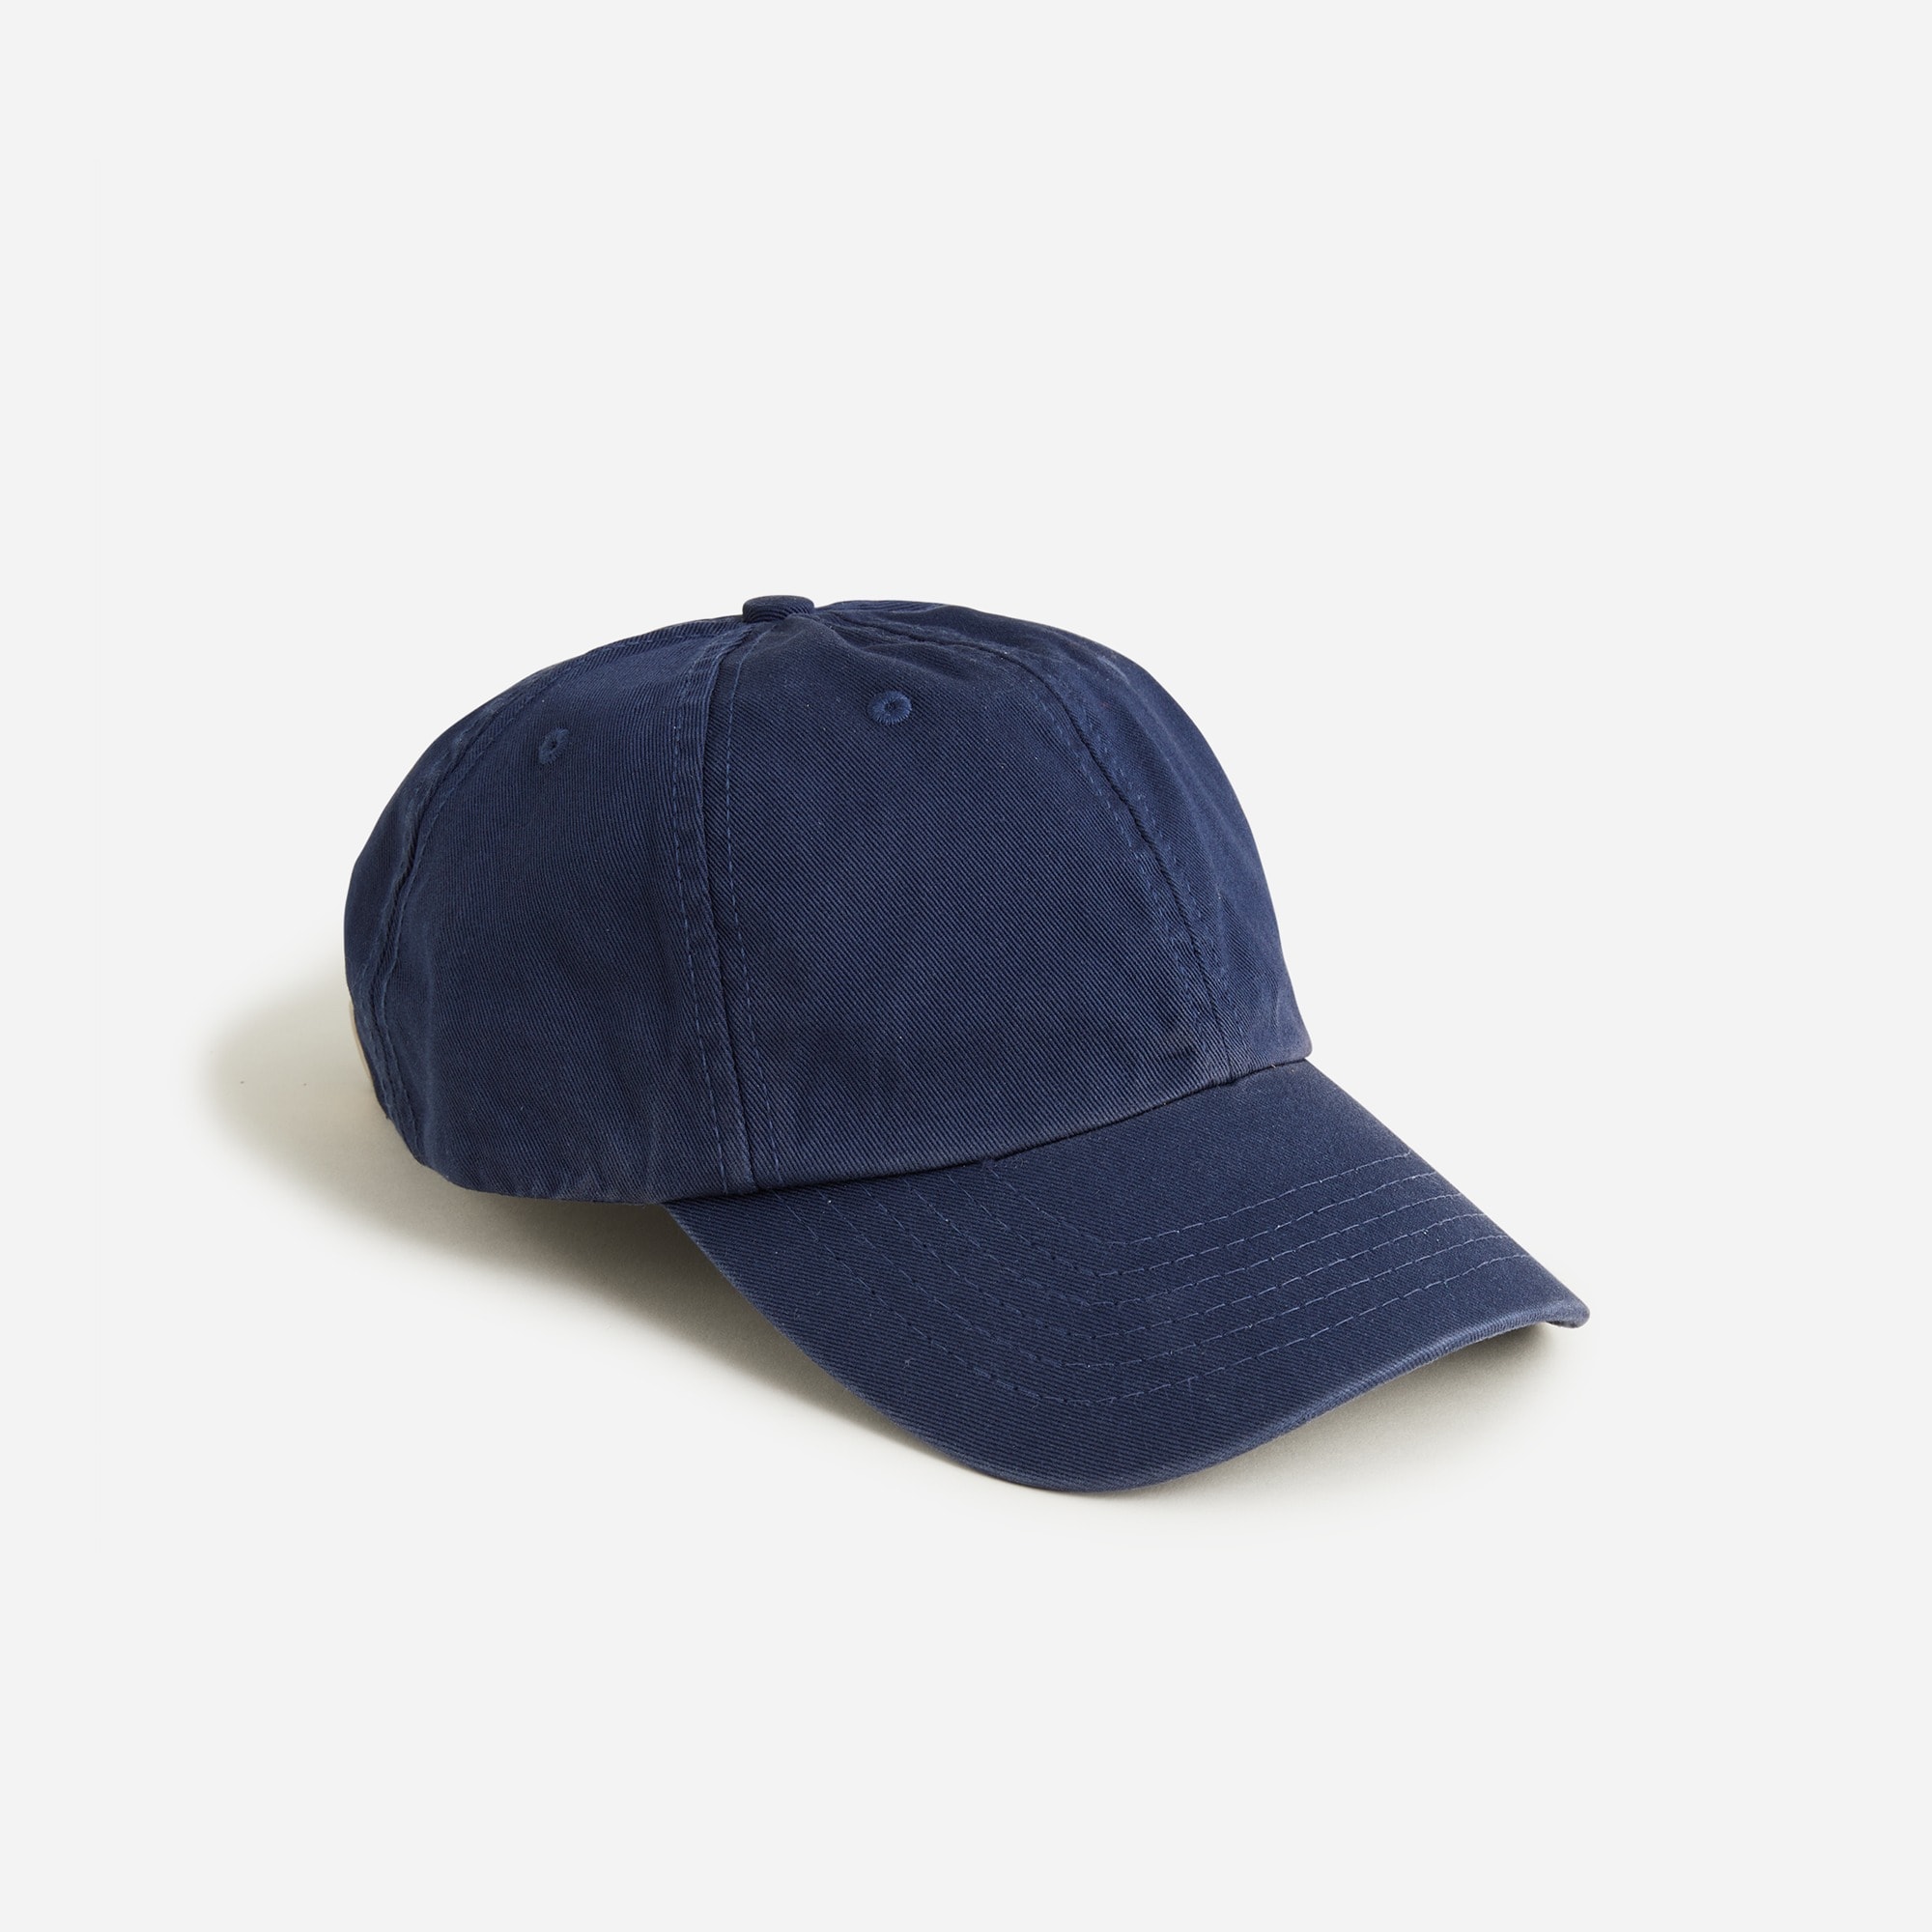  Made-in-the-USA garment-dyed twill baseball cap